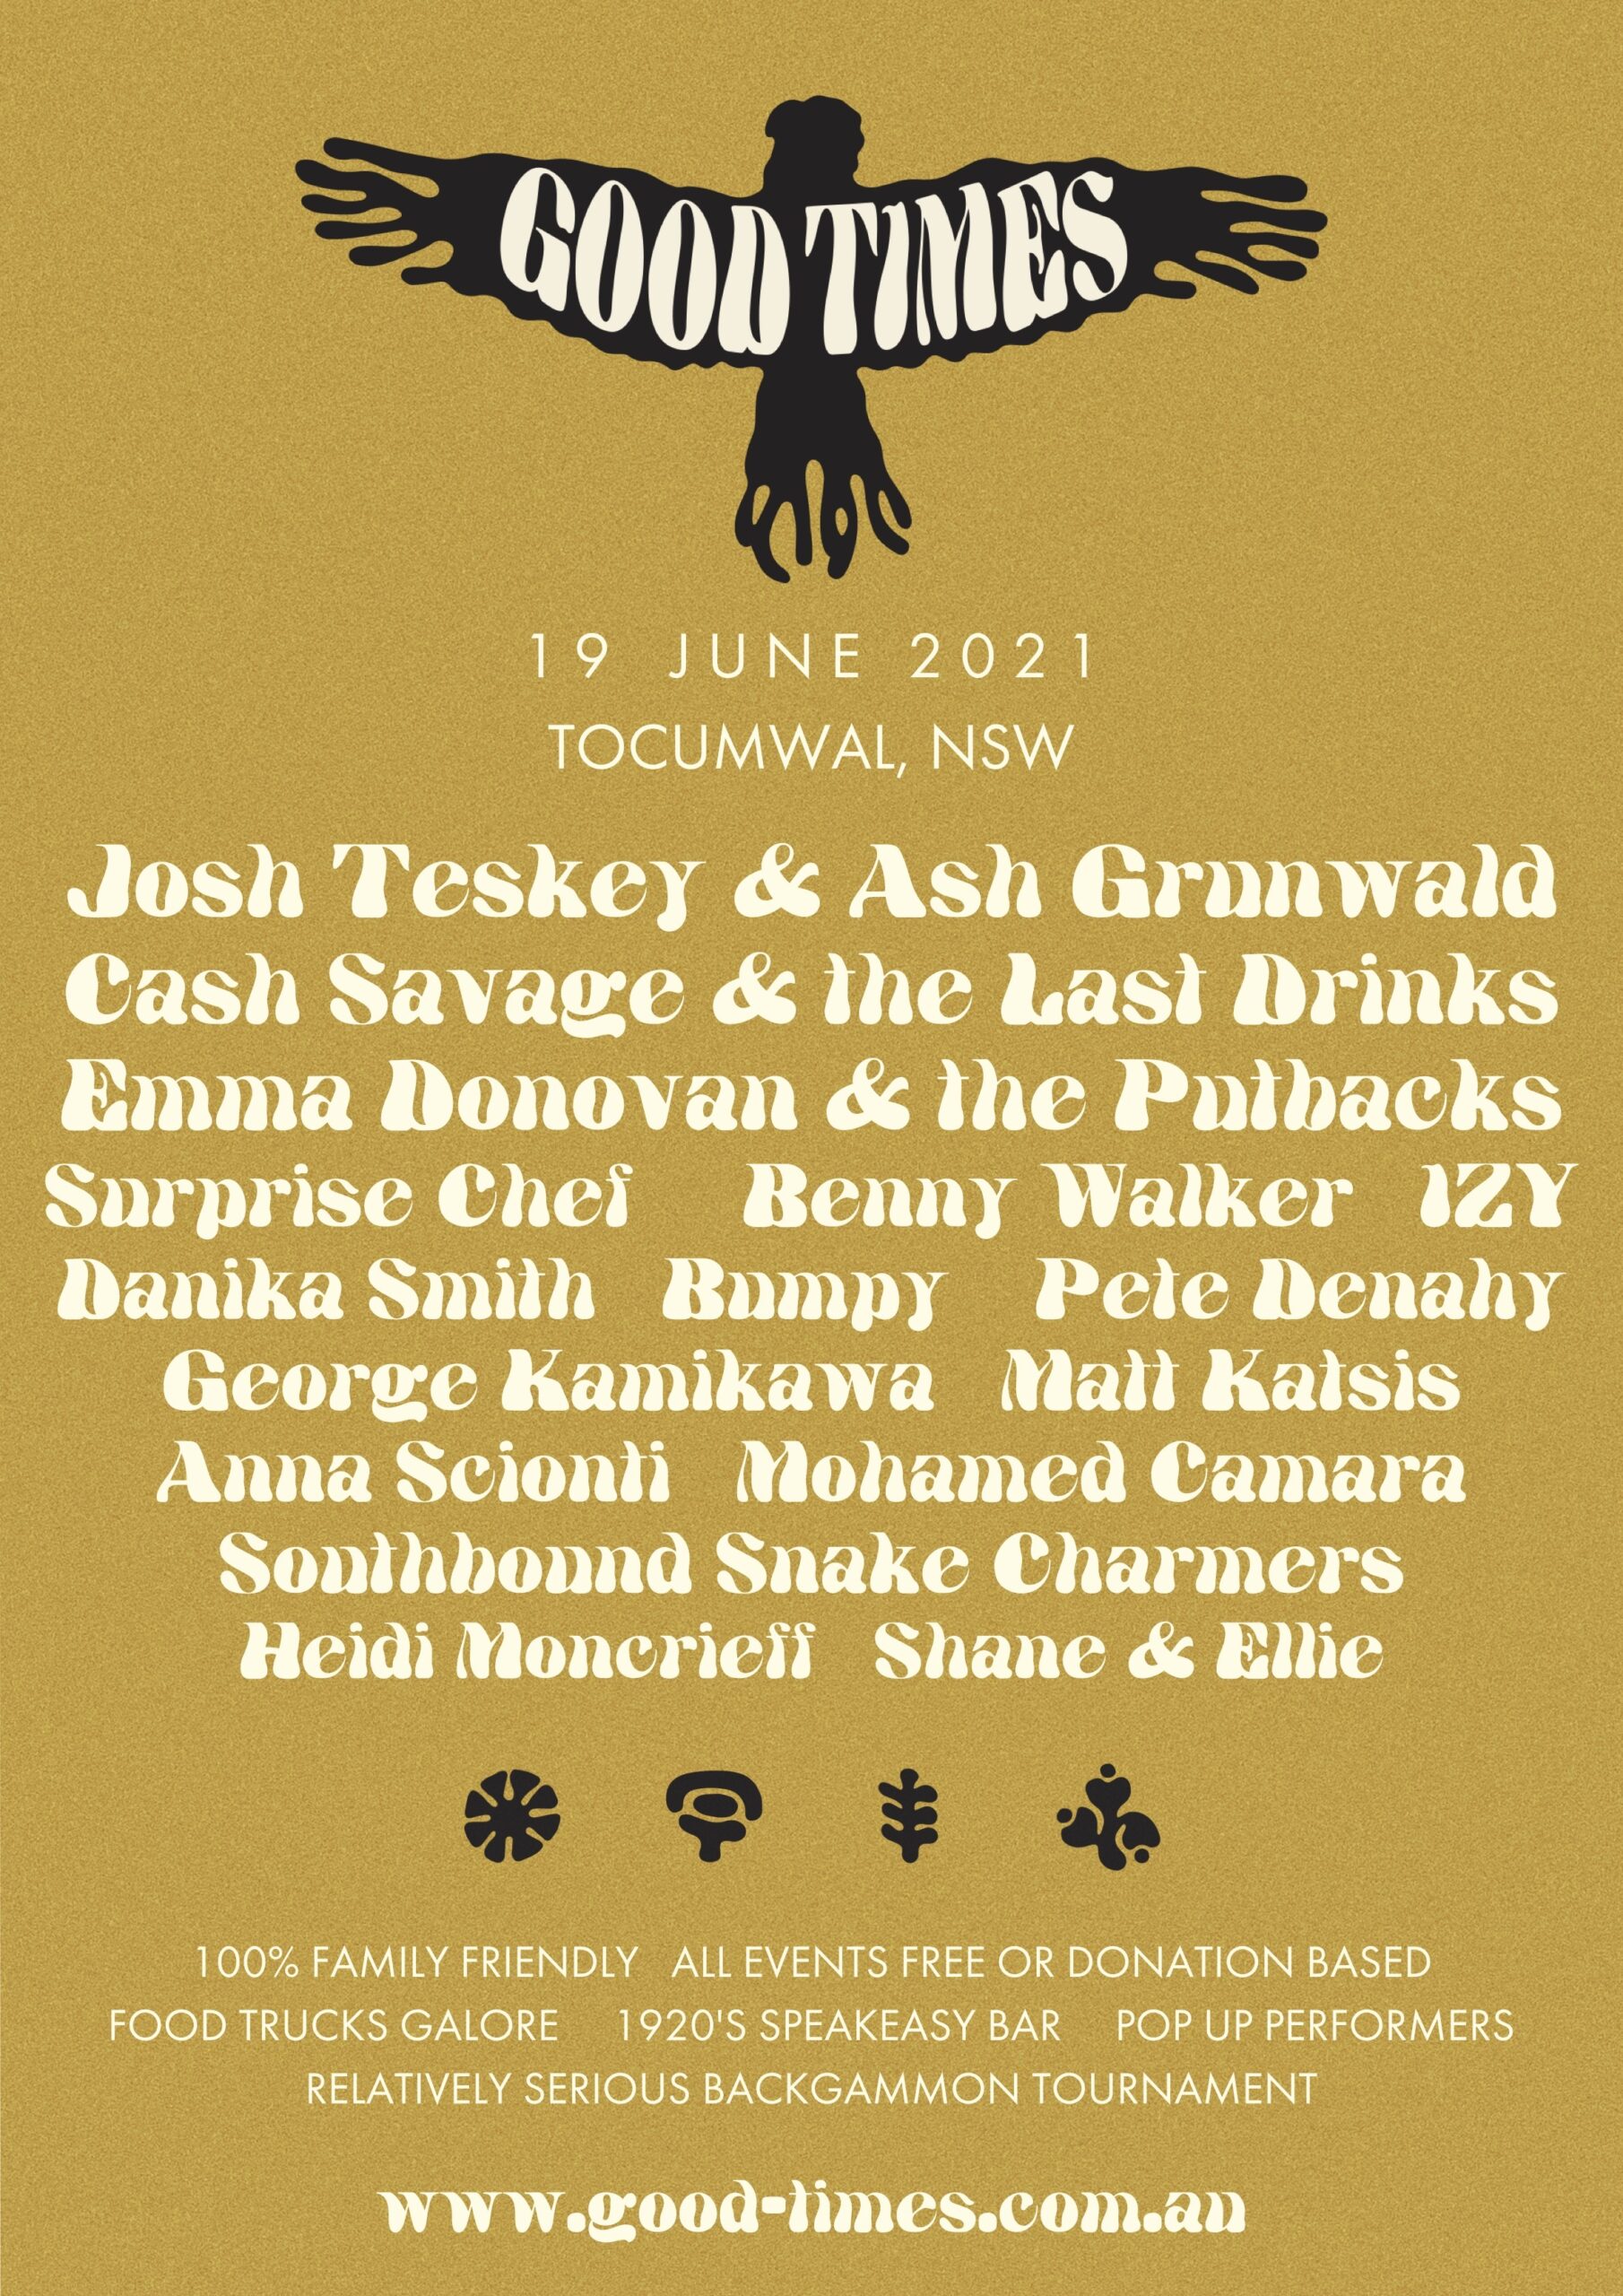 INTRODUCING GOOD TIMES FESTIVAL JUNE 18 & 19, 2021 TOCUMWAI, NSW